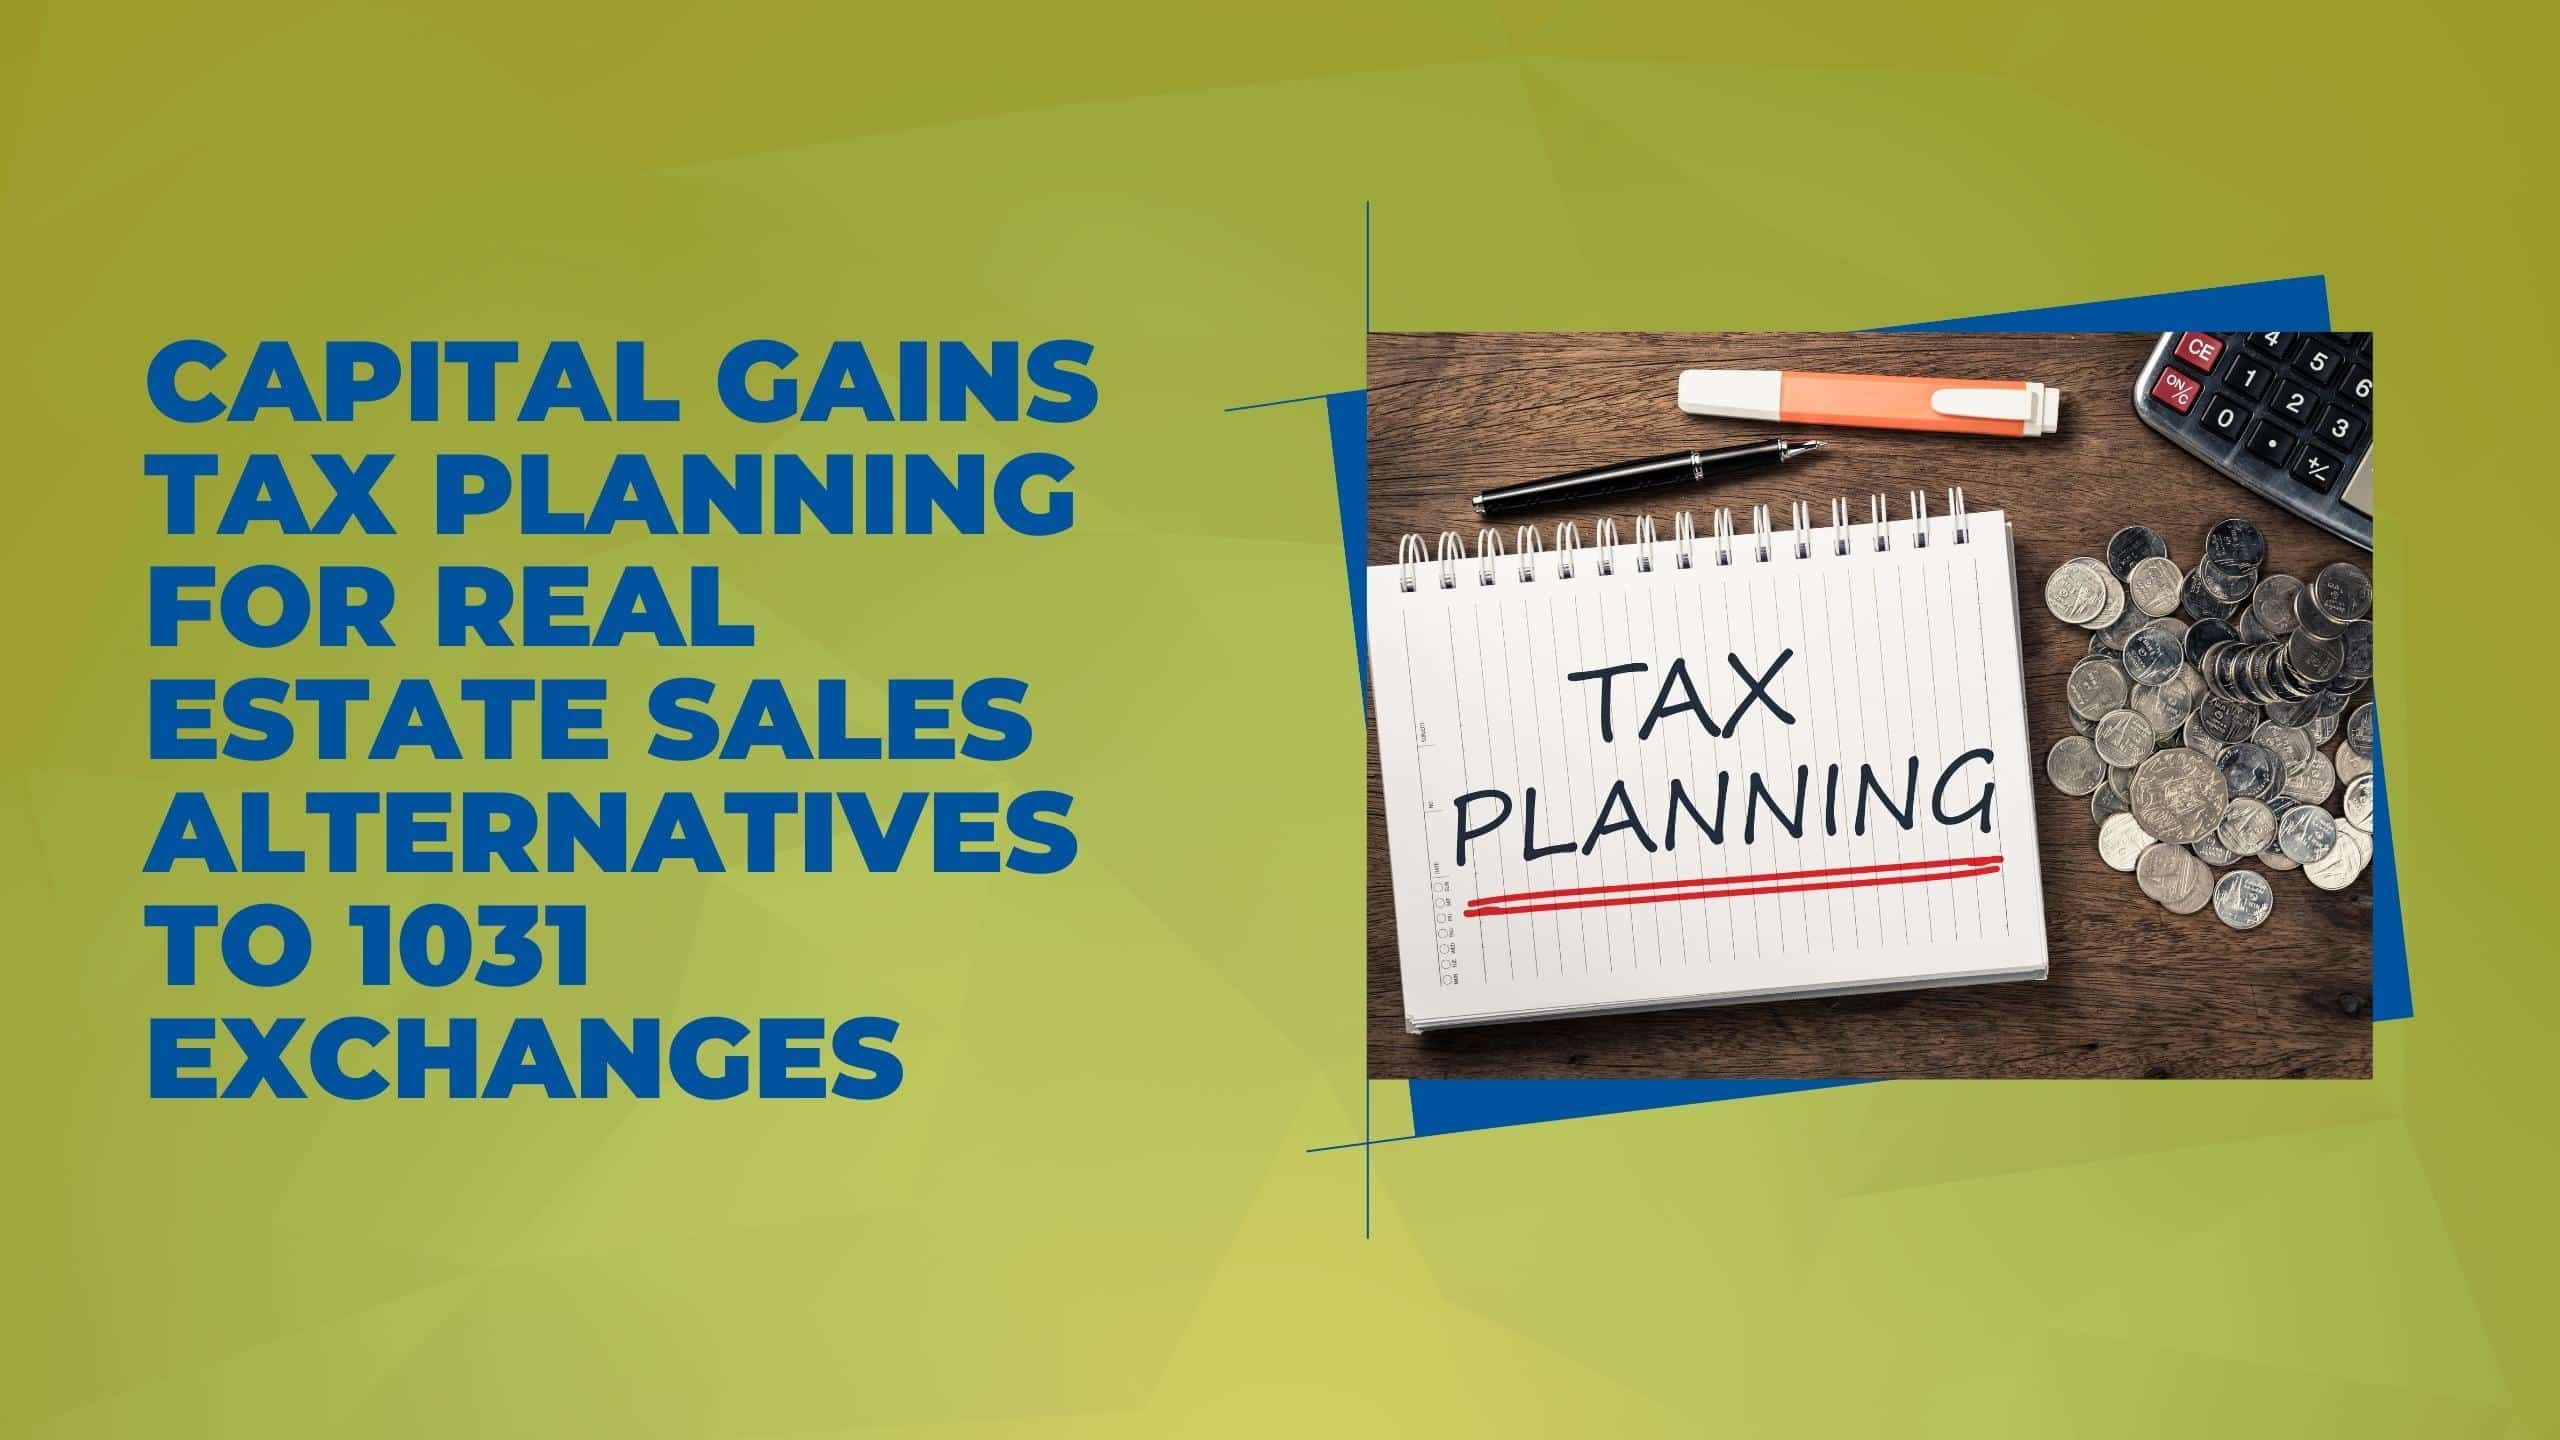 Capital Gains Tax Planning for Real Estate Sales Alternatives to 1031 Exchanges